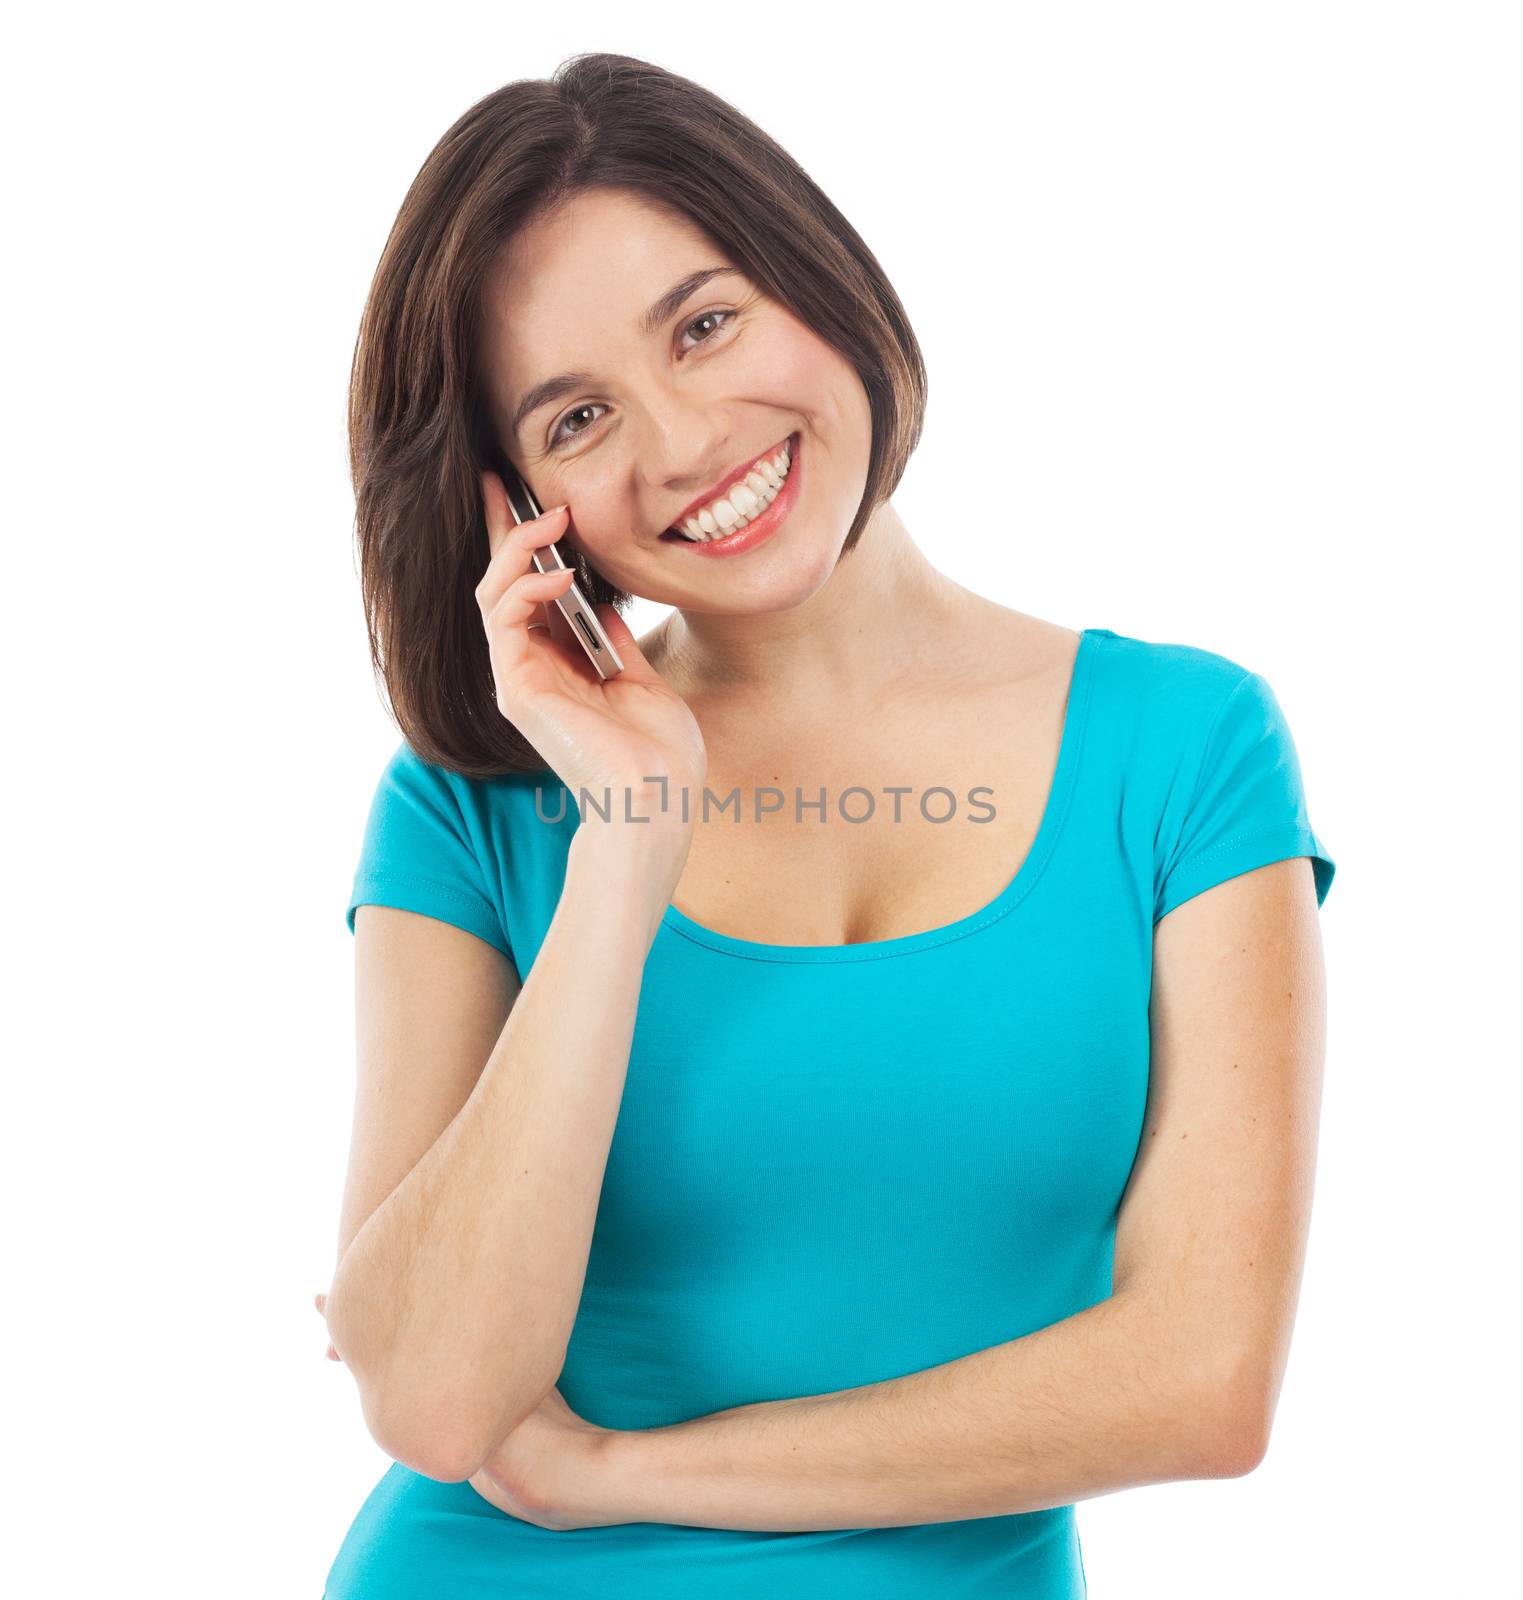 Pretty woman on the phone, isolated on white